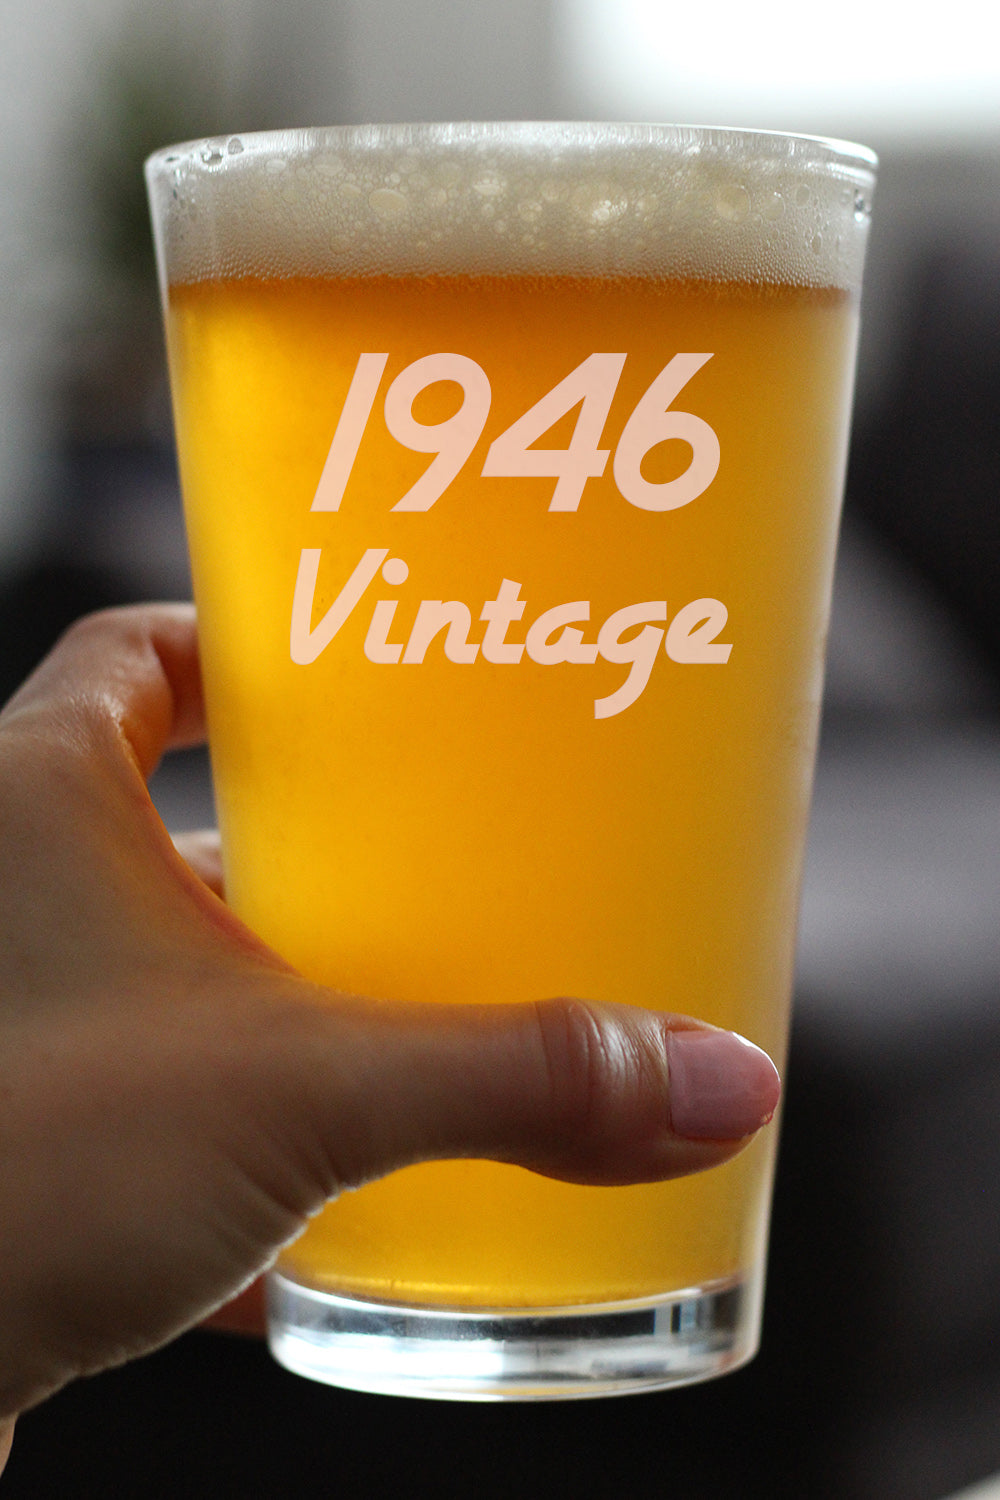 Vintage 1946 - Pint Glass for Beer - 77th Birthday Gifts for Men or Women Turning 77 - Fun Bday Party Decor - 16 oz